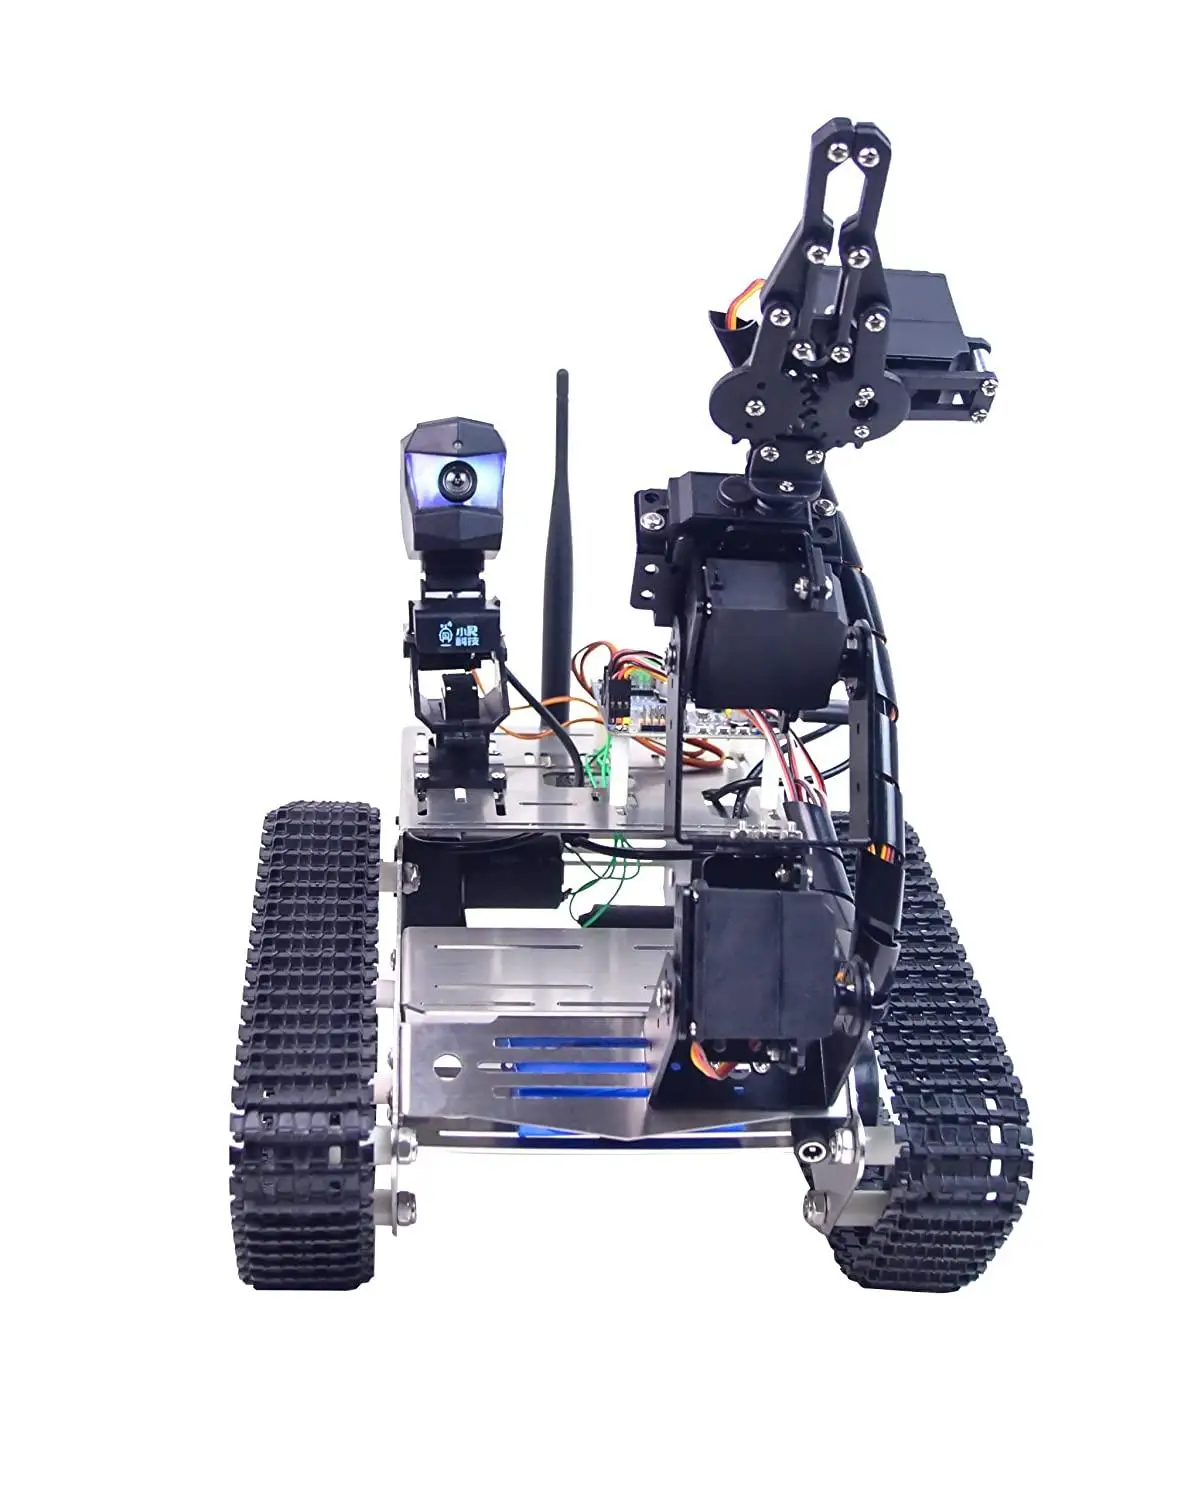 

XiaoR Geek FPV Robot Car Kit with Robotic 、 Hd Camera for Arduino,Utility Intelligent Tank Chassis Robotics Vehicle,Smart Lear